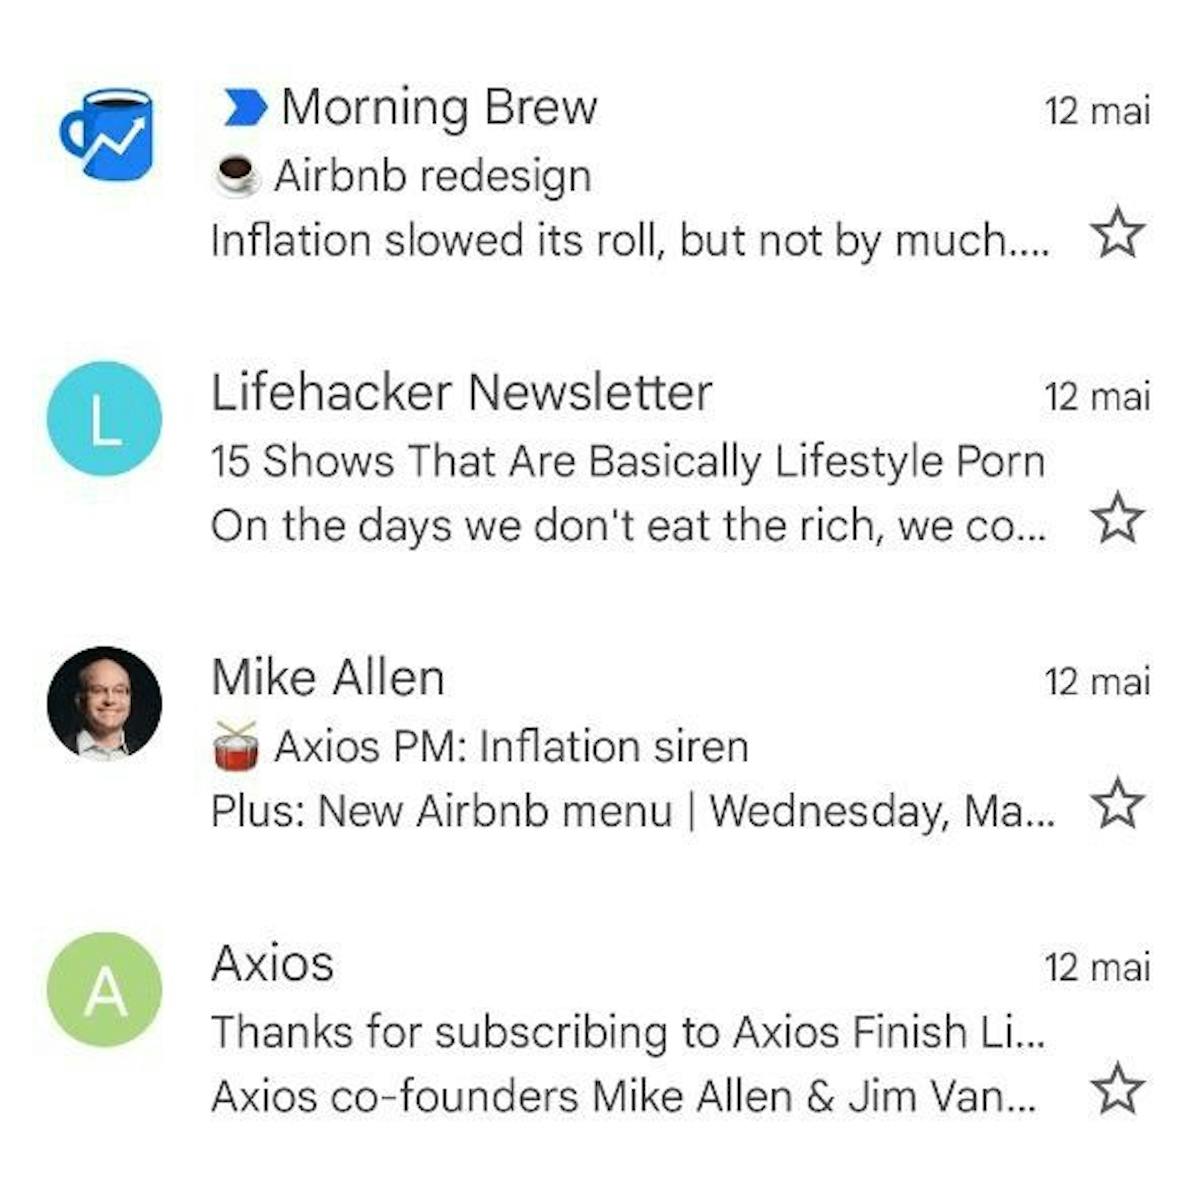 Morning Brew has their logo set as an email avatar. Mike Allen chooses to display a photo of himself, while both Lifehacker Newsletter and Axior have auto-generated avatars displayed with the letters L and A in colorful circles.